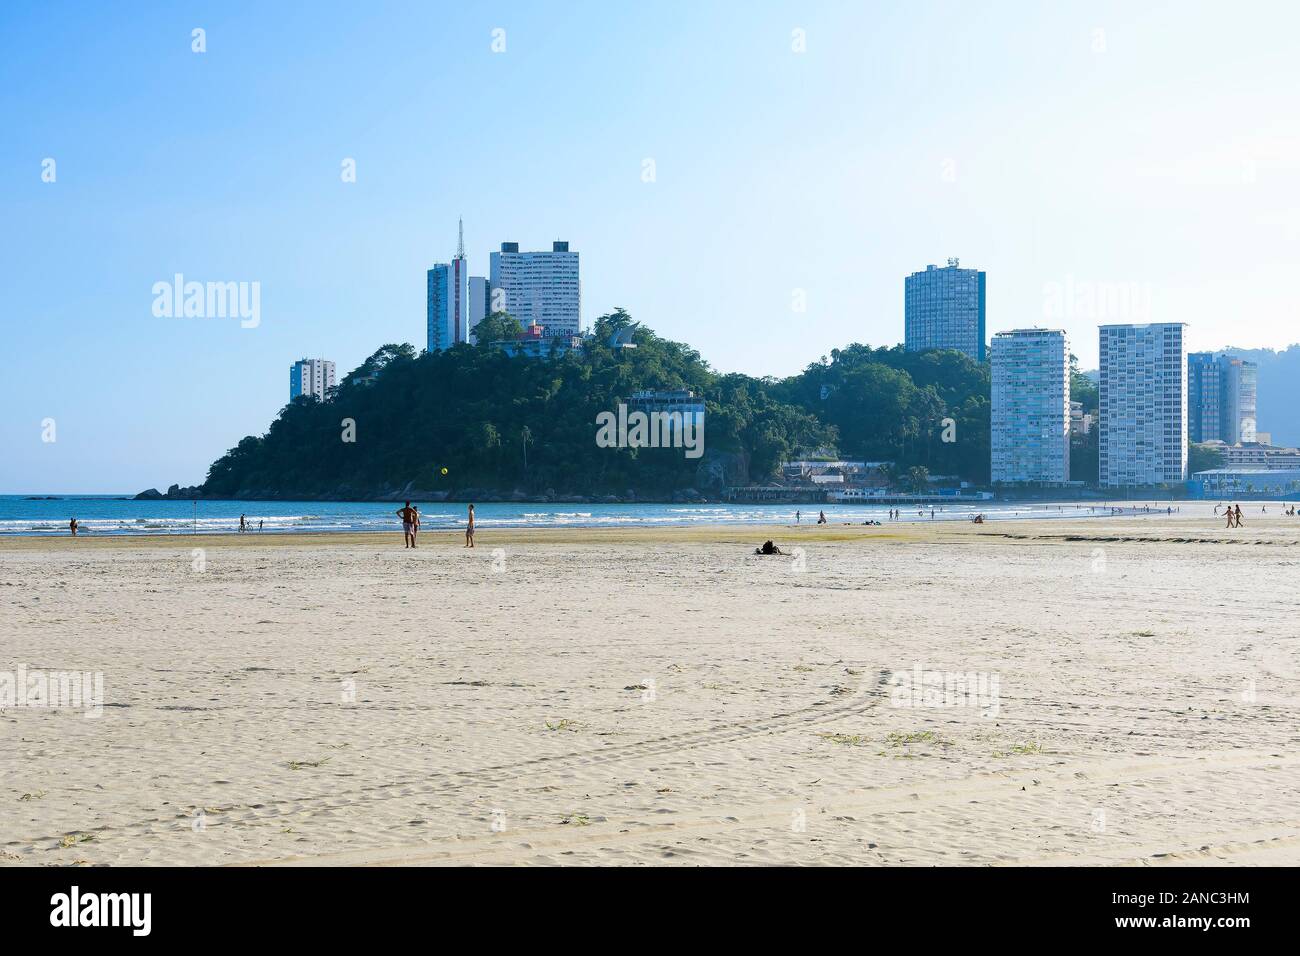 Sao Vicente - SP, Brazil - November 21, 2019: View of Praia do Itarare beach and the Ilha Porchat island on the background. People on the beach on a s Stock Photo